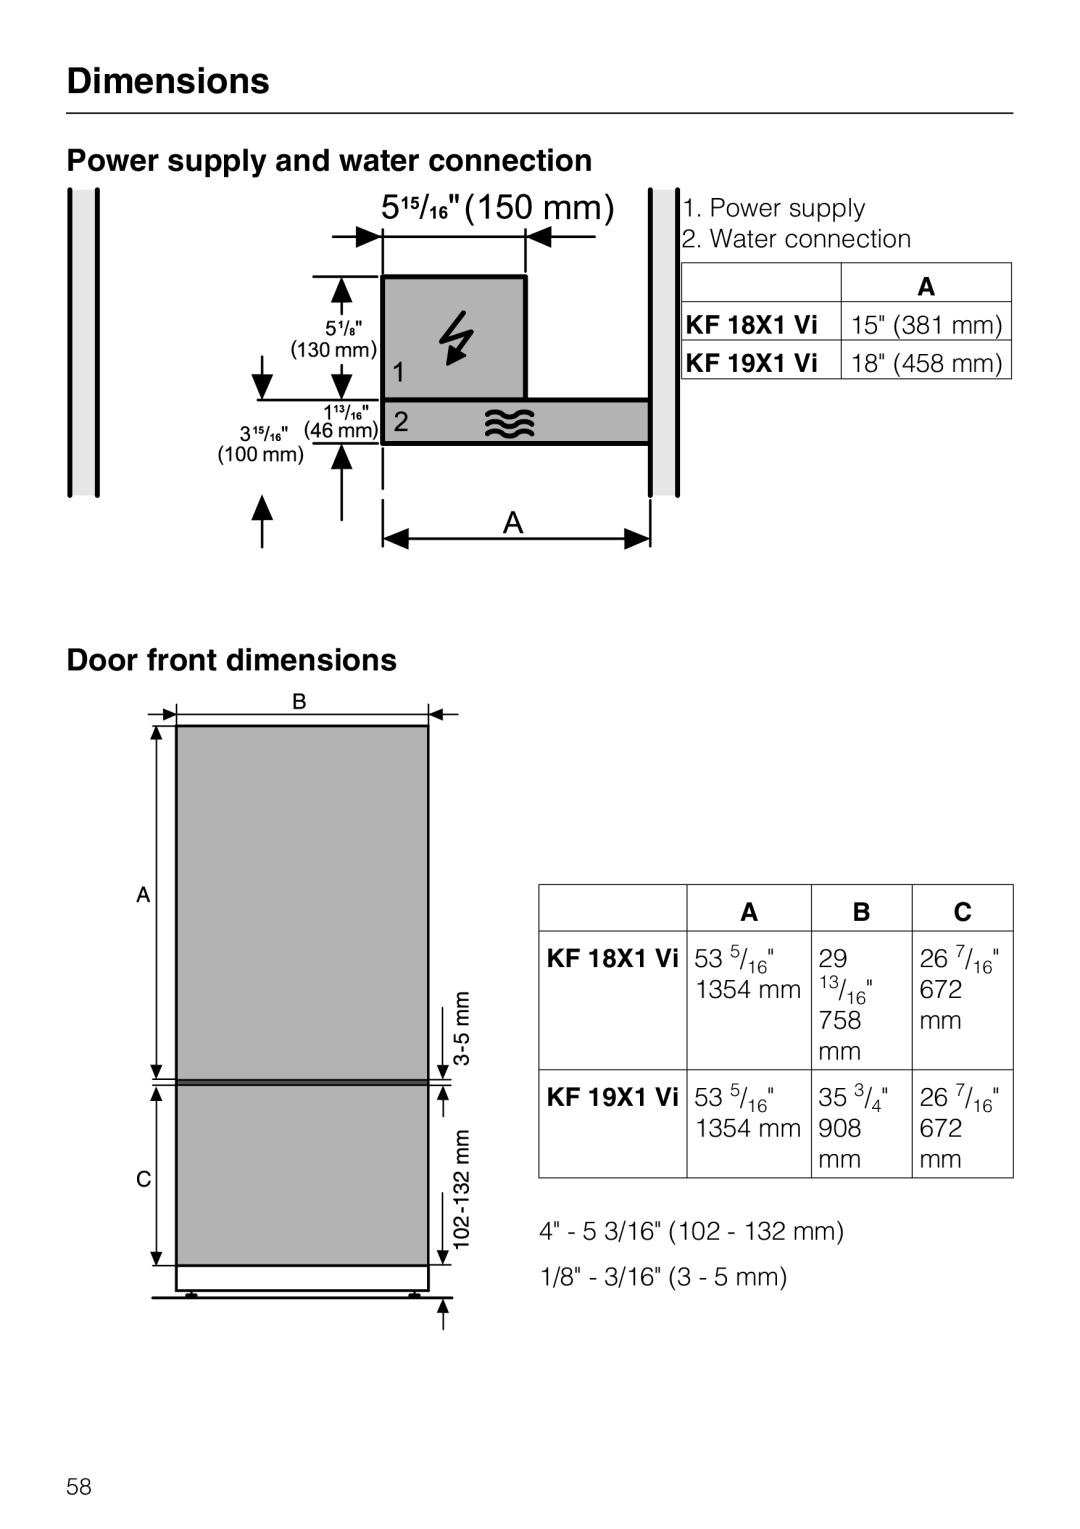 Miele KF 1901 Vi, KF 1911 Vi, KF 1801 Vi, KF 1811 Vi Power supply and water connection, Door front dimensions, Dimensions 